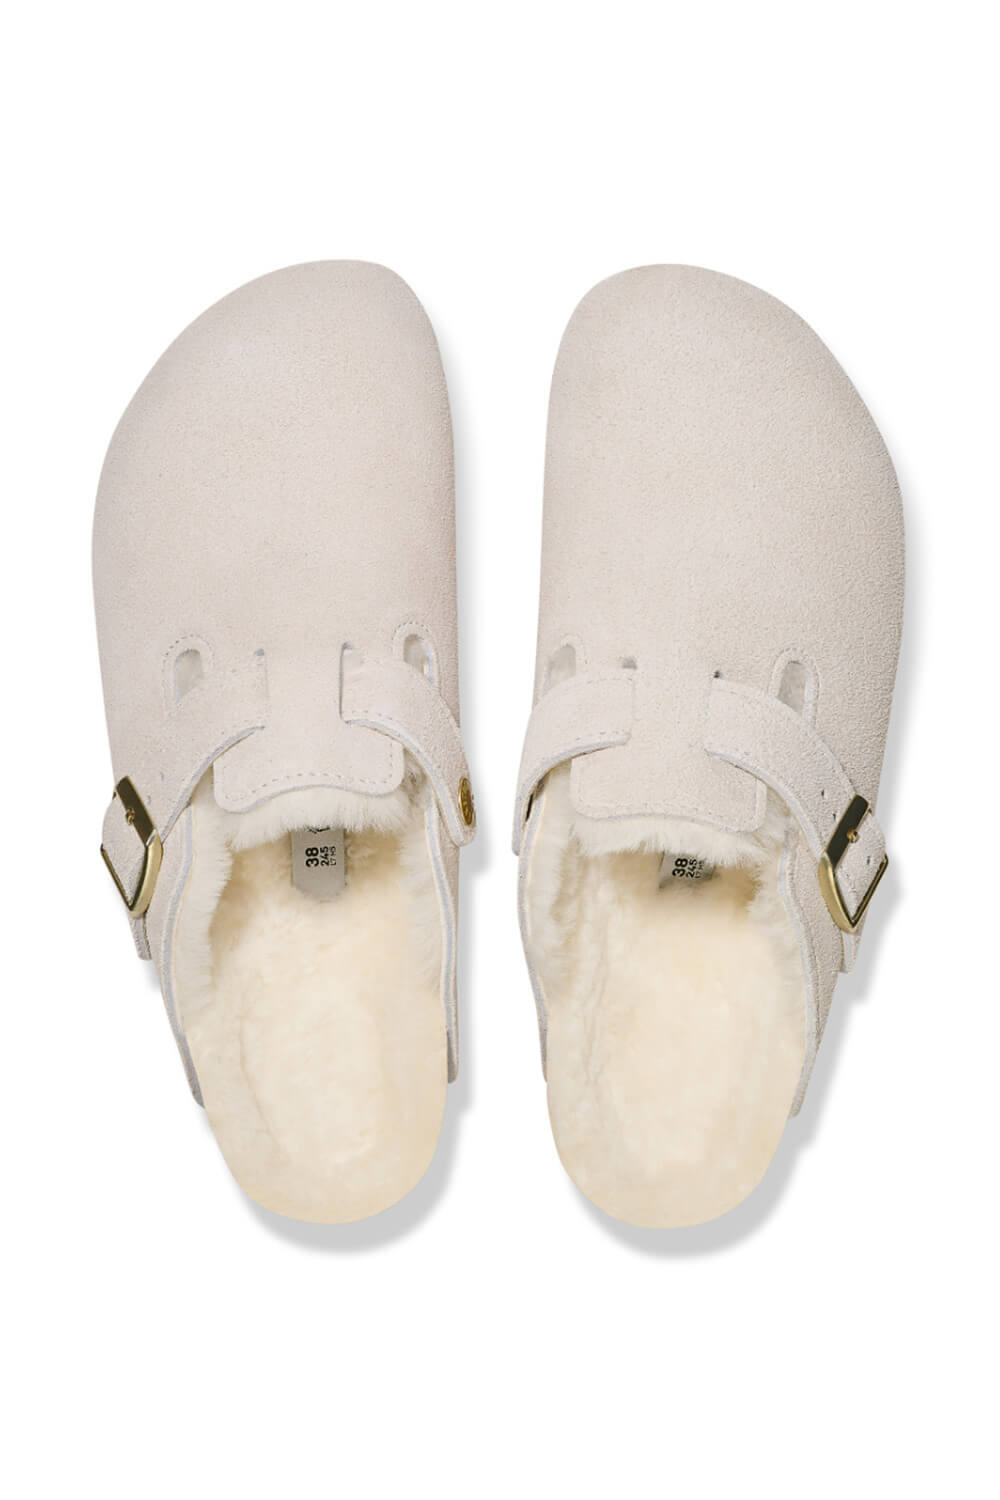 BIRKENSTOCK: SHOES BOOTS AND SLIPPERS, BIRKENSTOCK BOSTON SHEARLING SLIPPERS